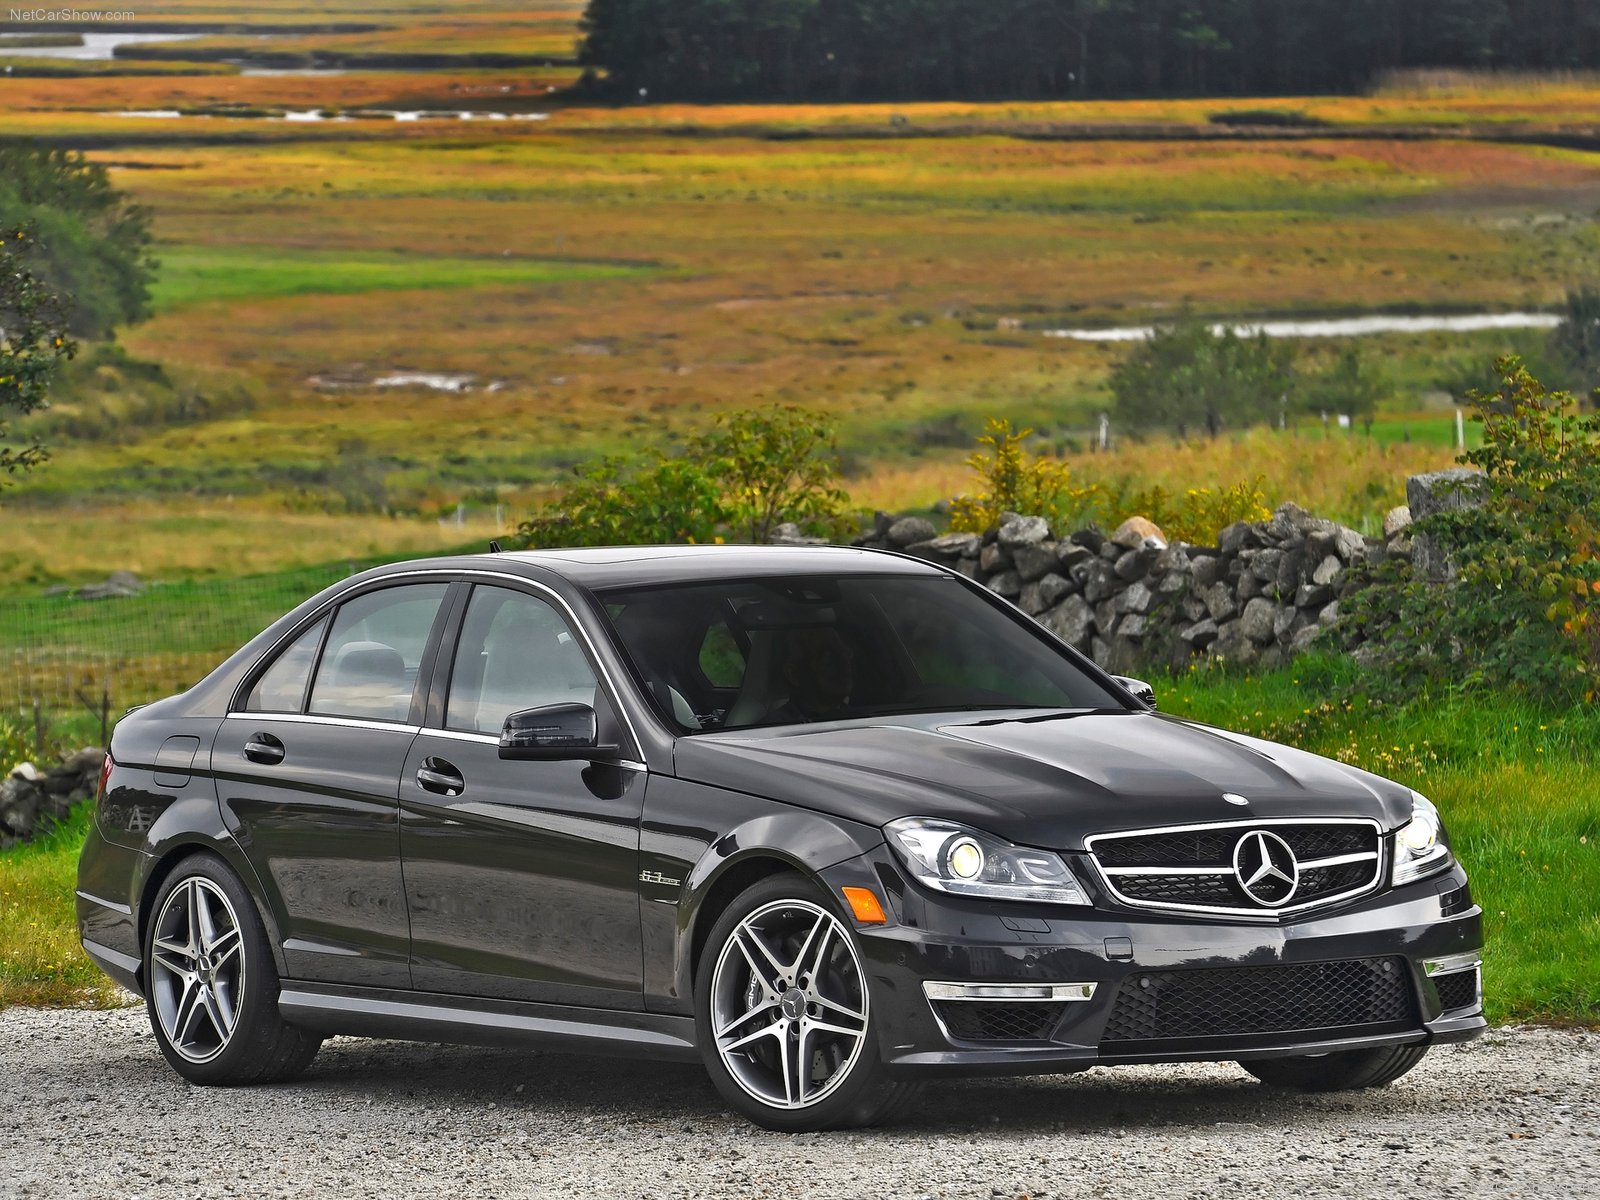 Mercedes Benz C Class AMG photos PhotoGallery with 113 pics CarsBase com